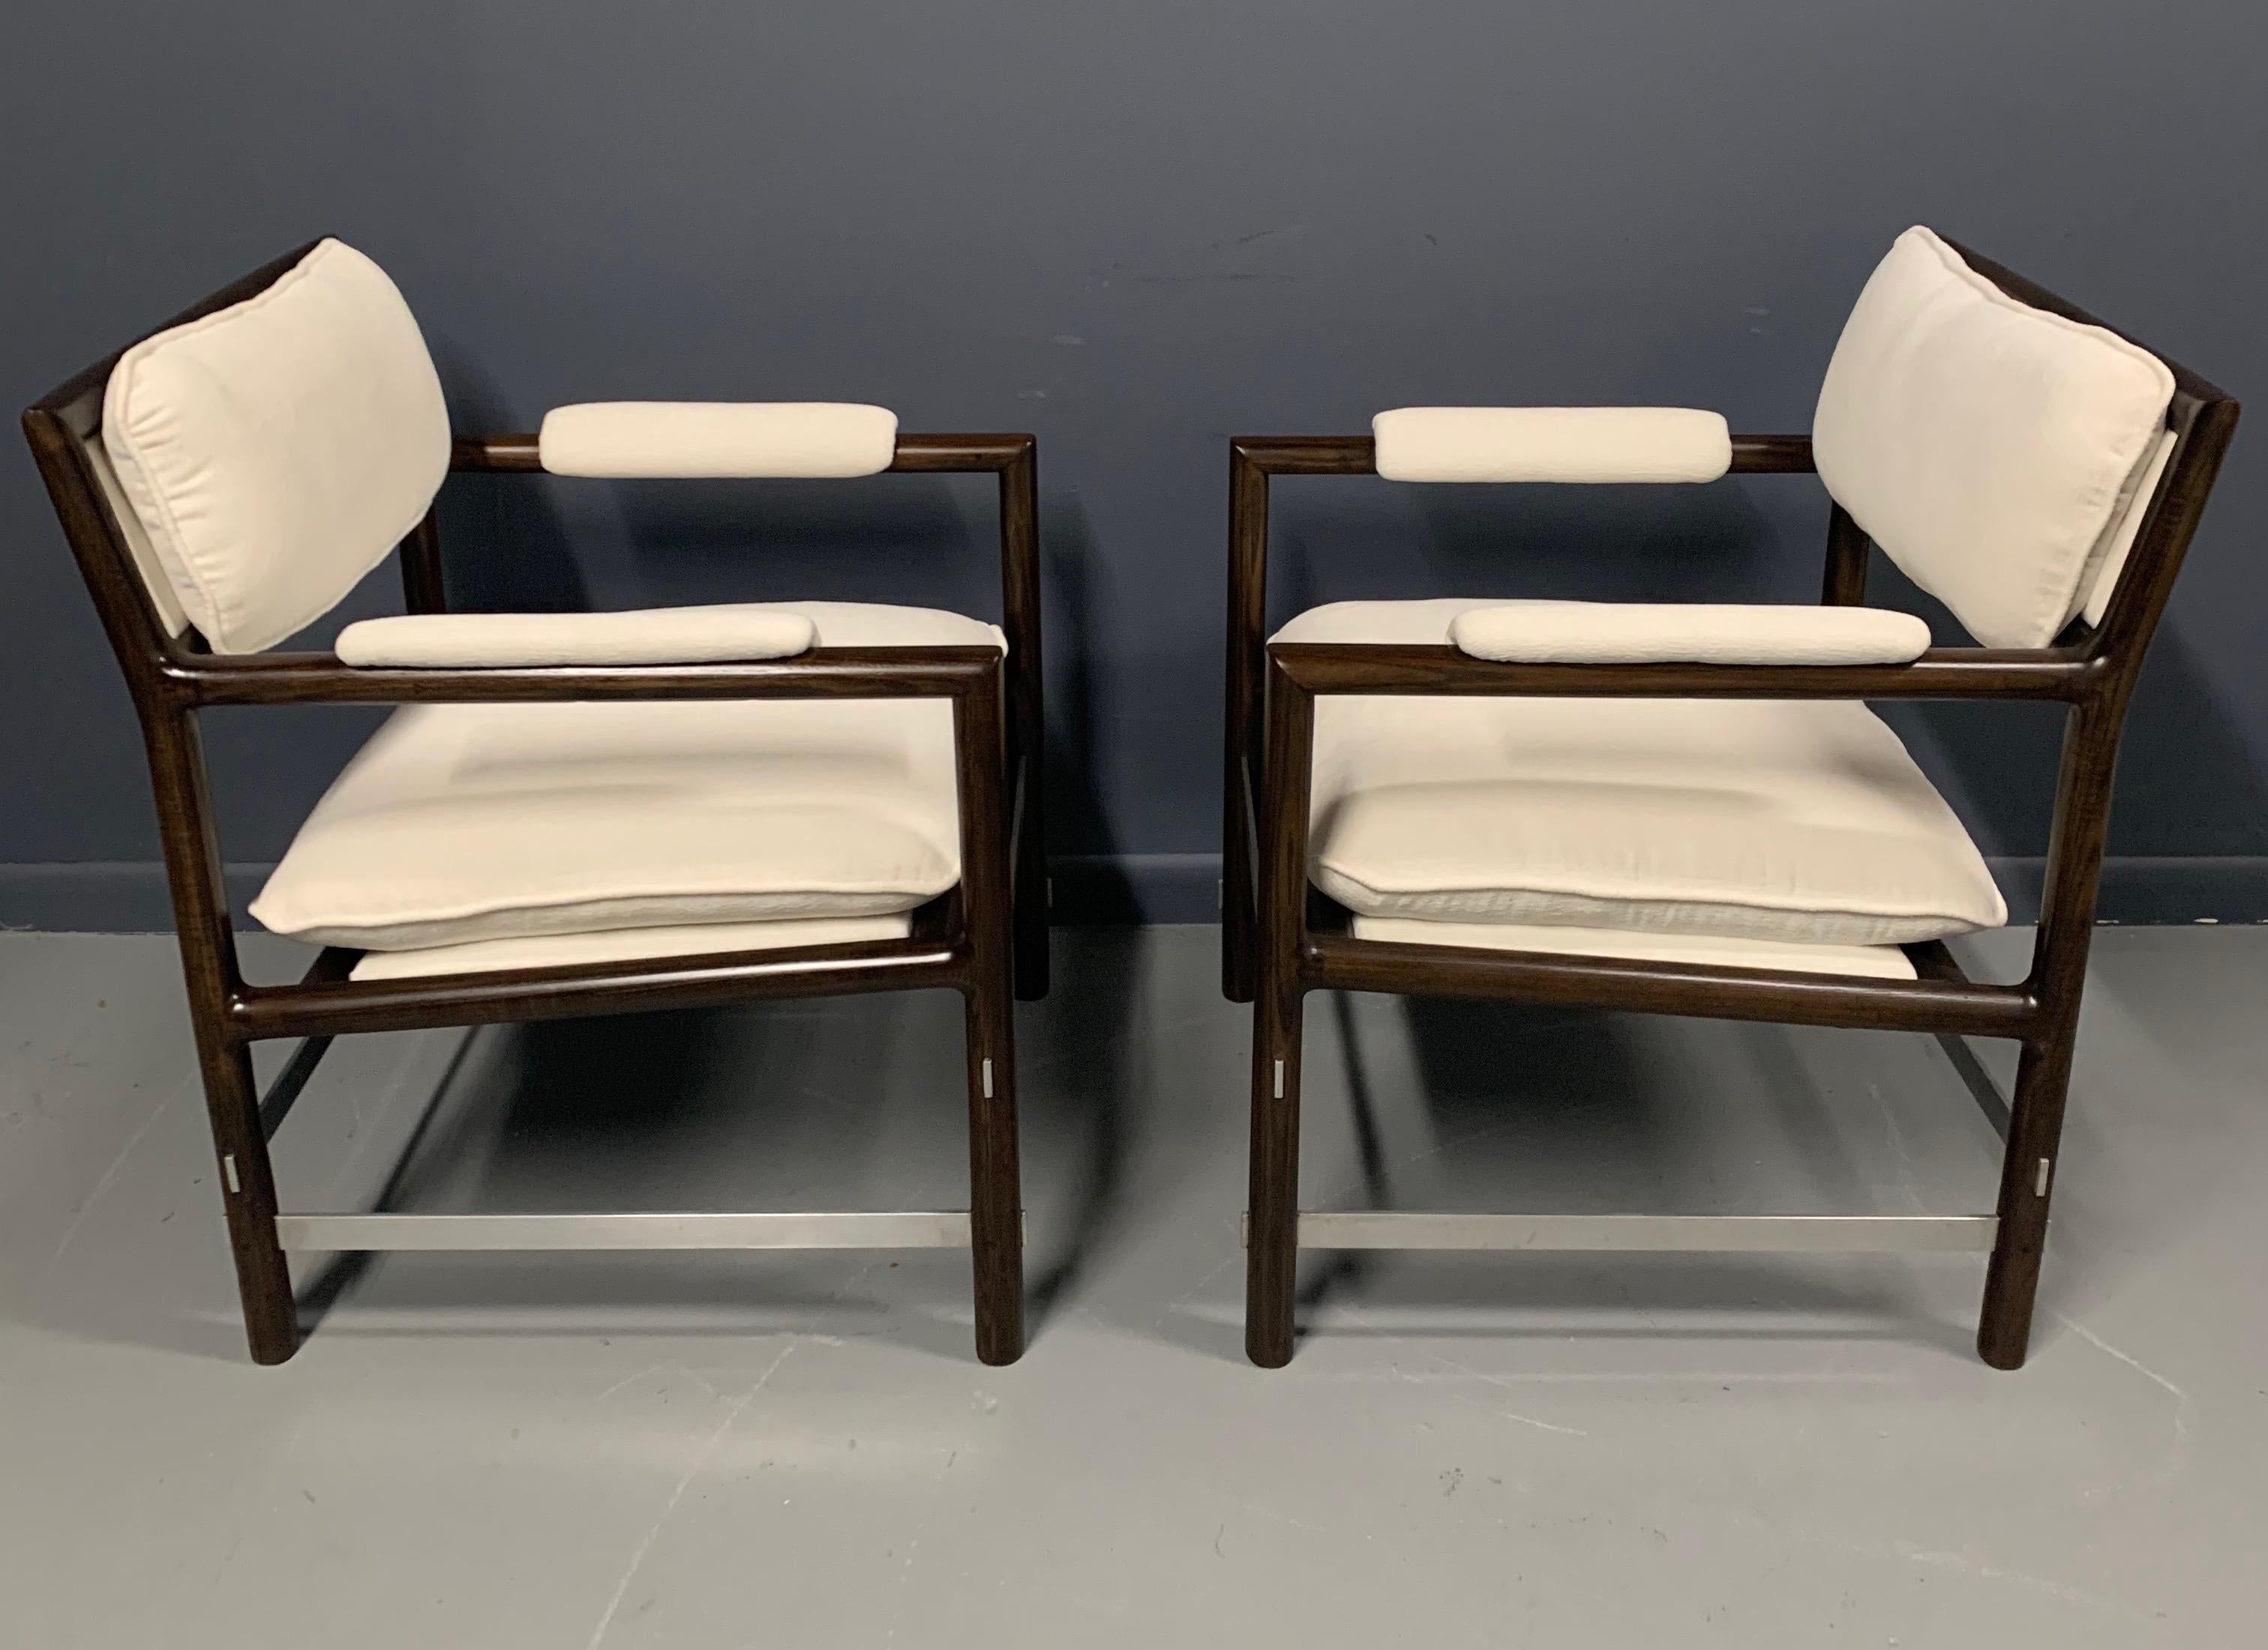 Mahogany Edward Wormley Pair of Outstanding Armchairs for Dunbar in Velvet Midcentury For Sale